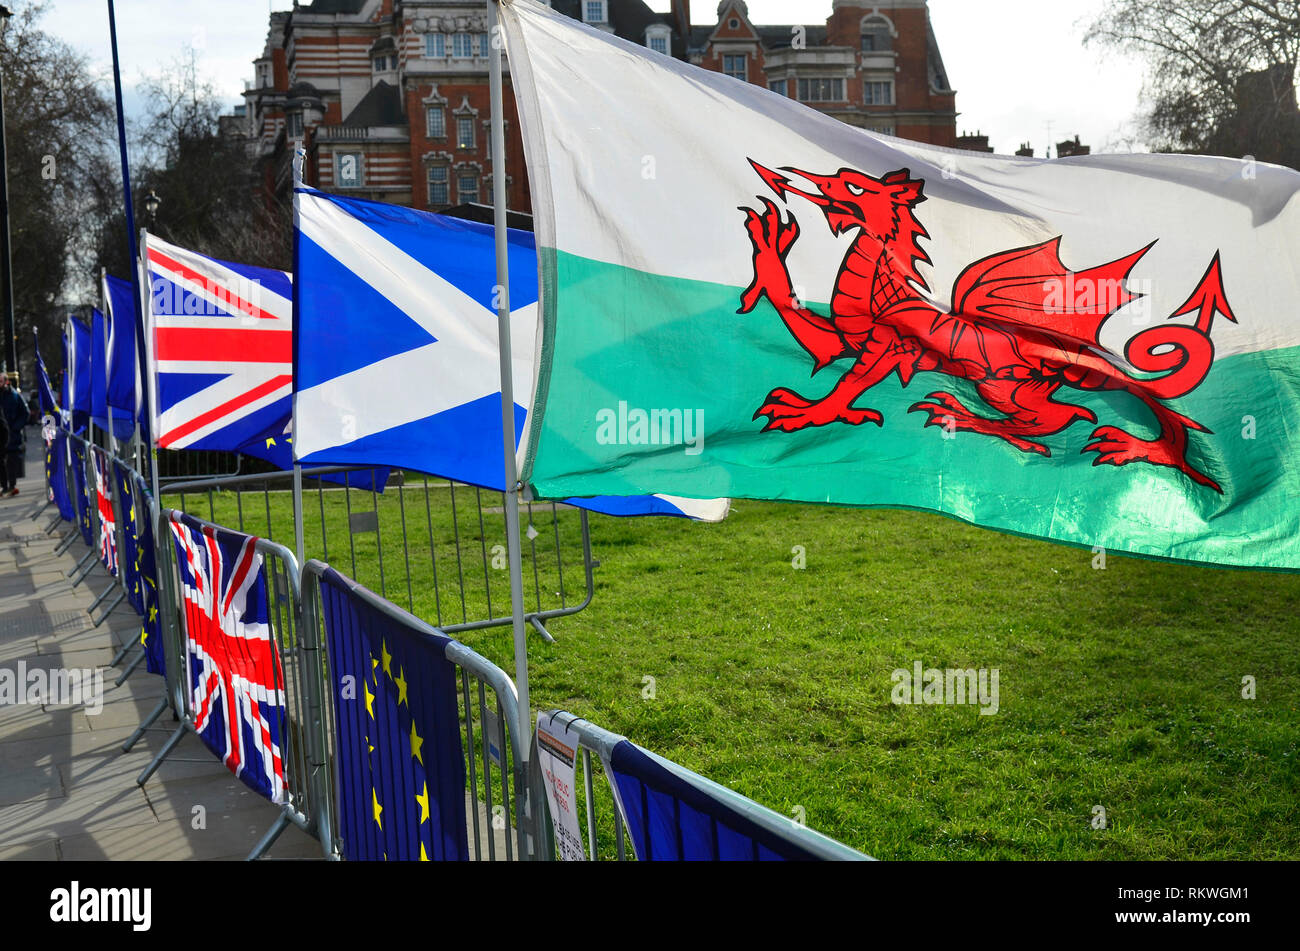 Westminster, London, UK.  12th Feb 2019. Politicians around College Green, Westminster. SODEM's anti-Brexit campaign flags flying Credit: PjrFoto/Alamy Live News Stock Photo